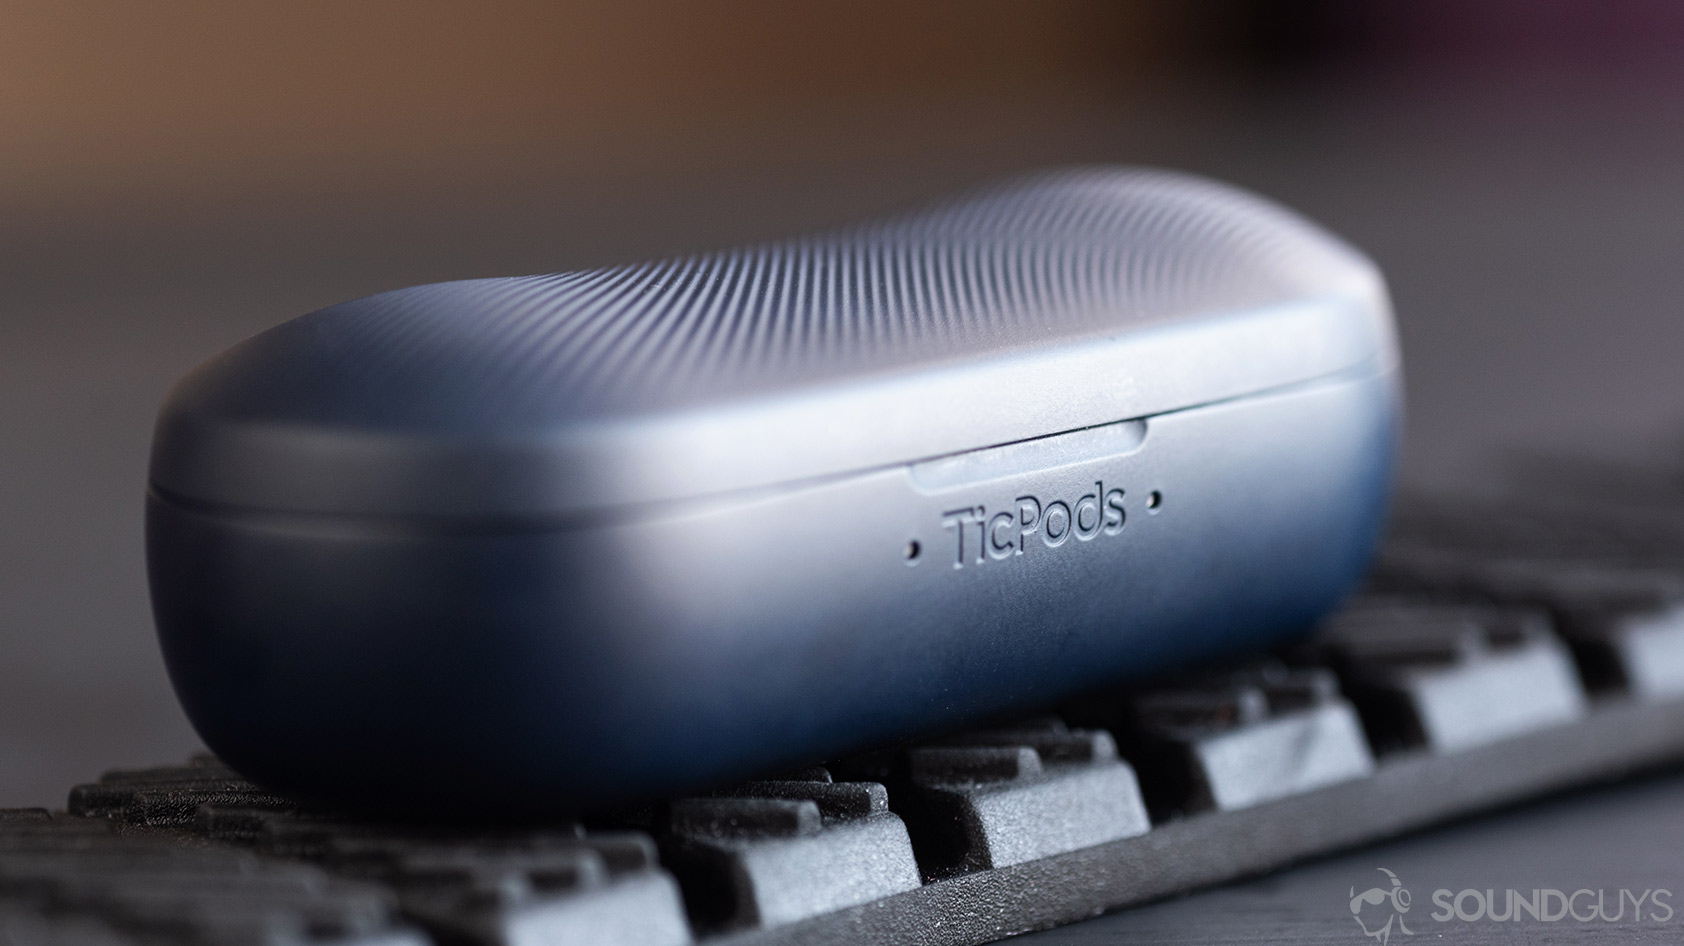 A macro picture of the Mobvoi TicPods 2 Pro true wireless earbuds charging case with the TicPods name in focus.